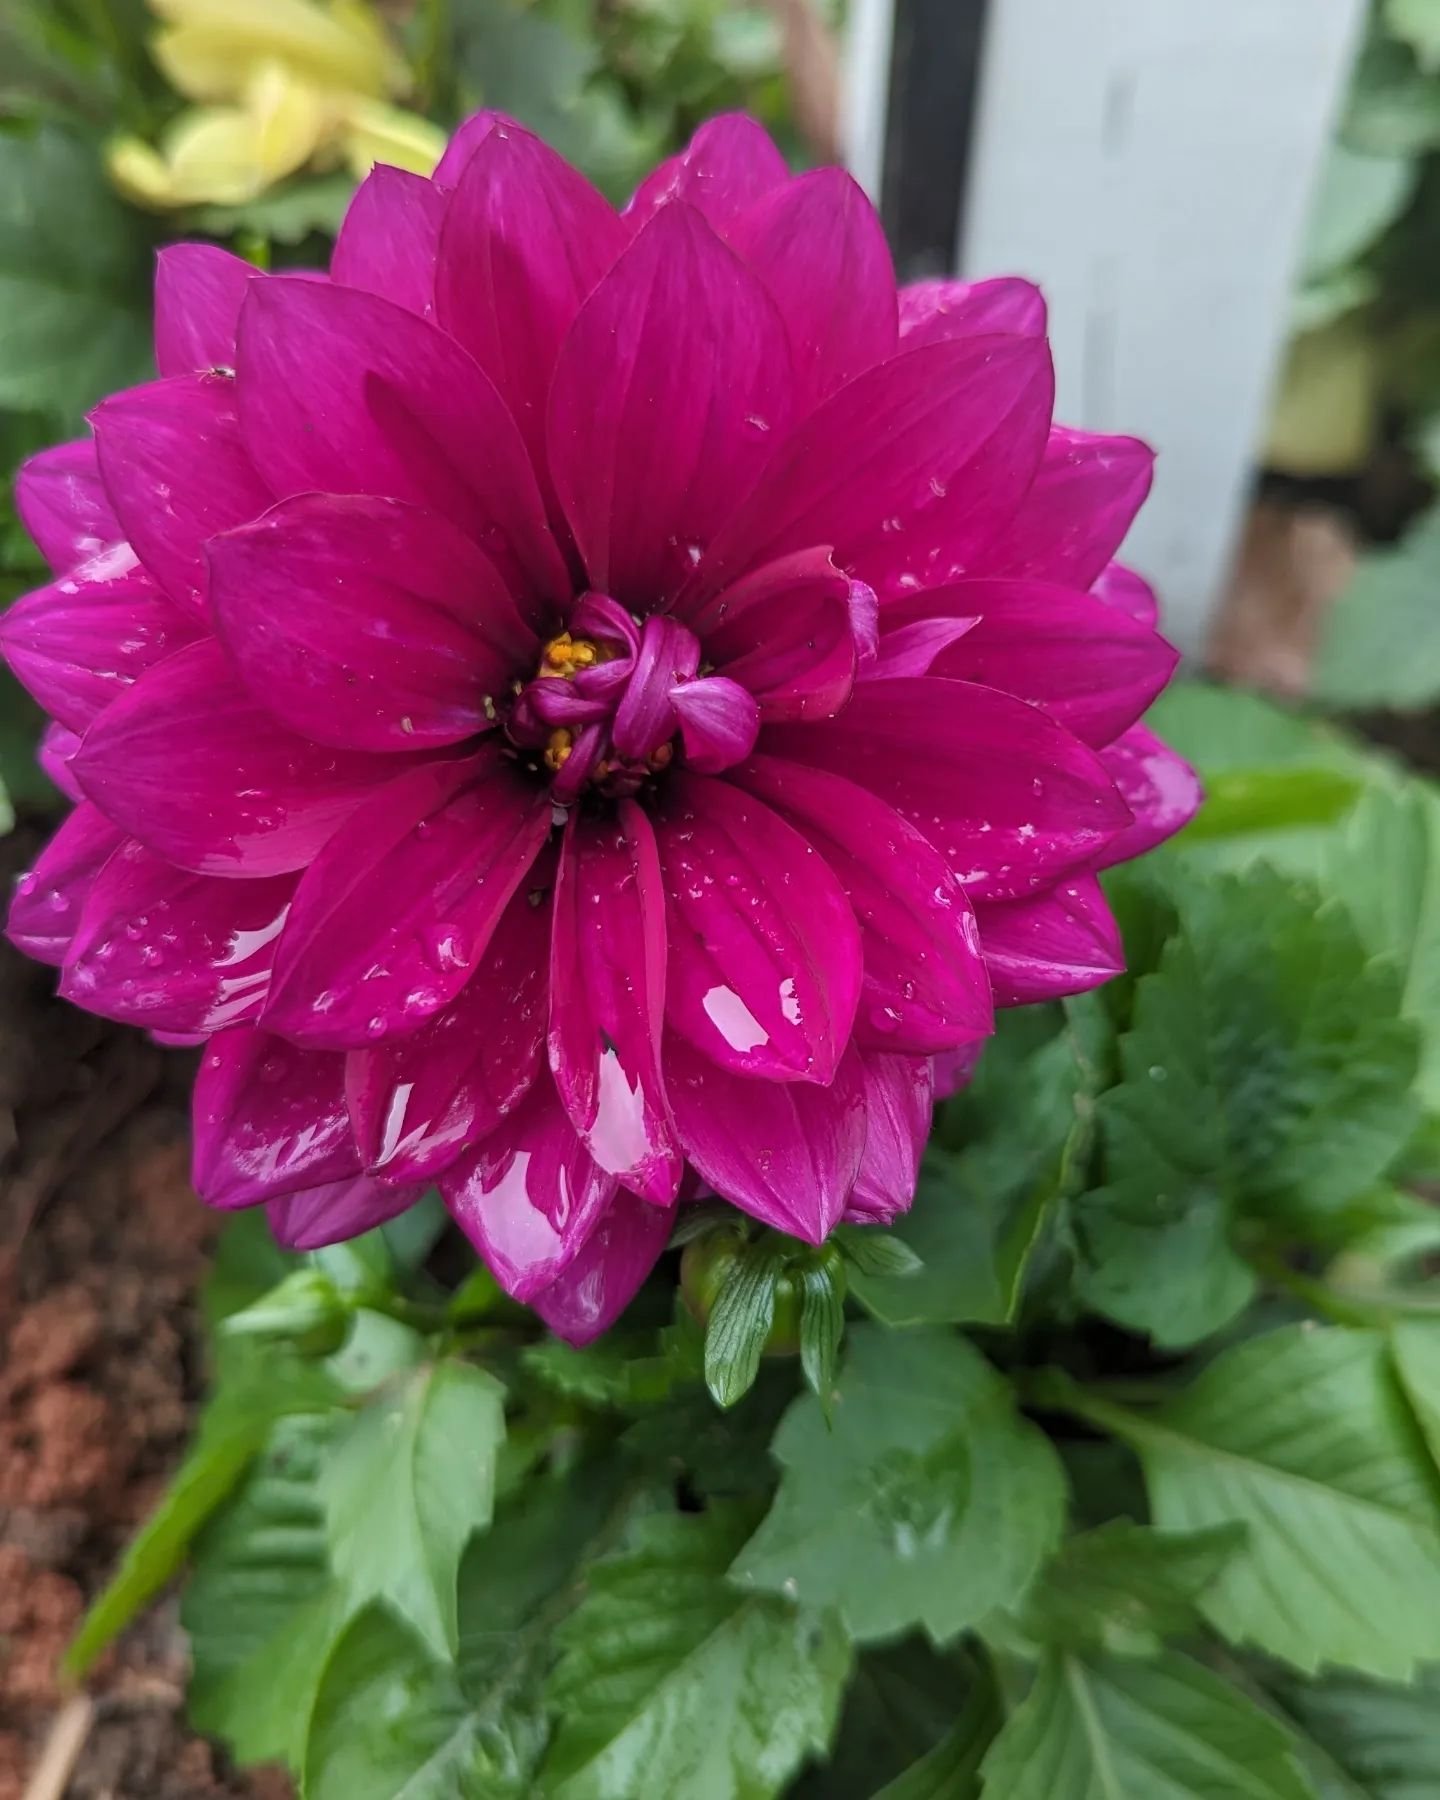 Nothing like a new bloom to brighten the morning! 🤩